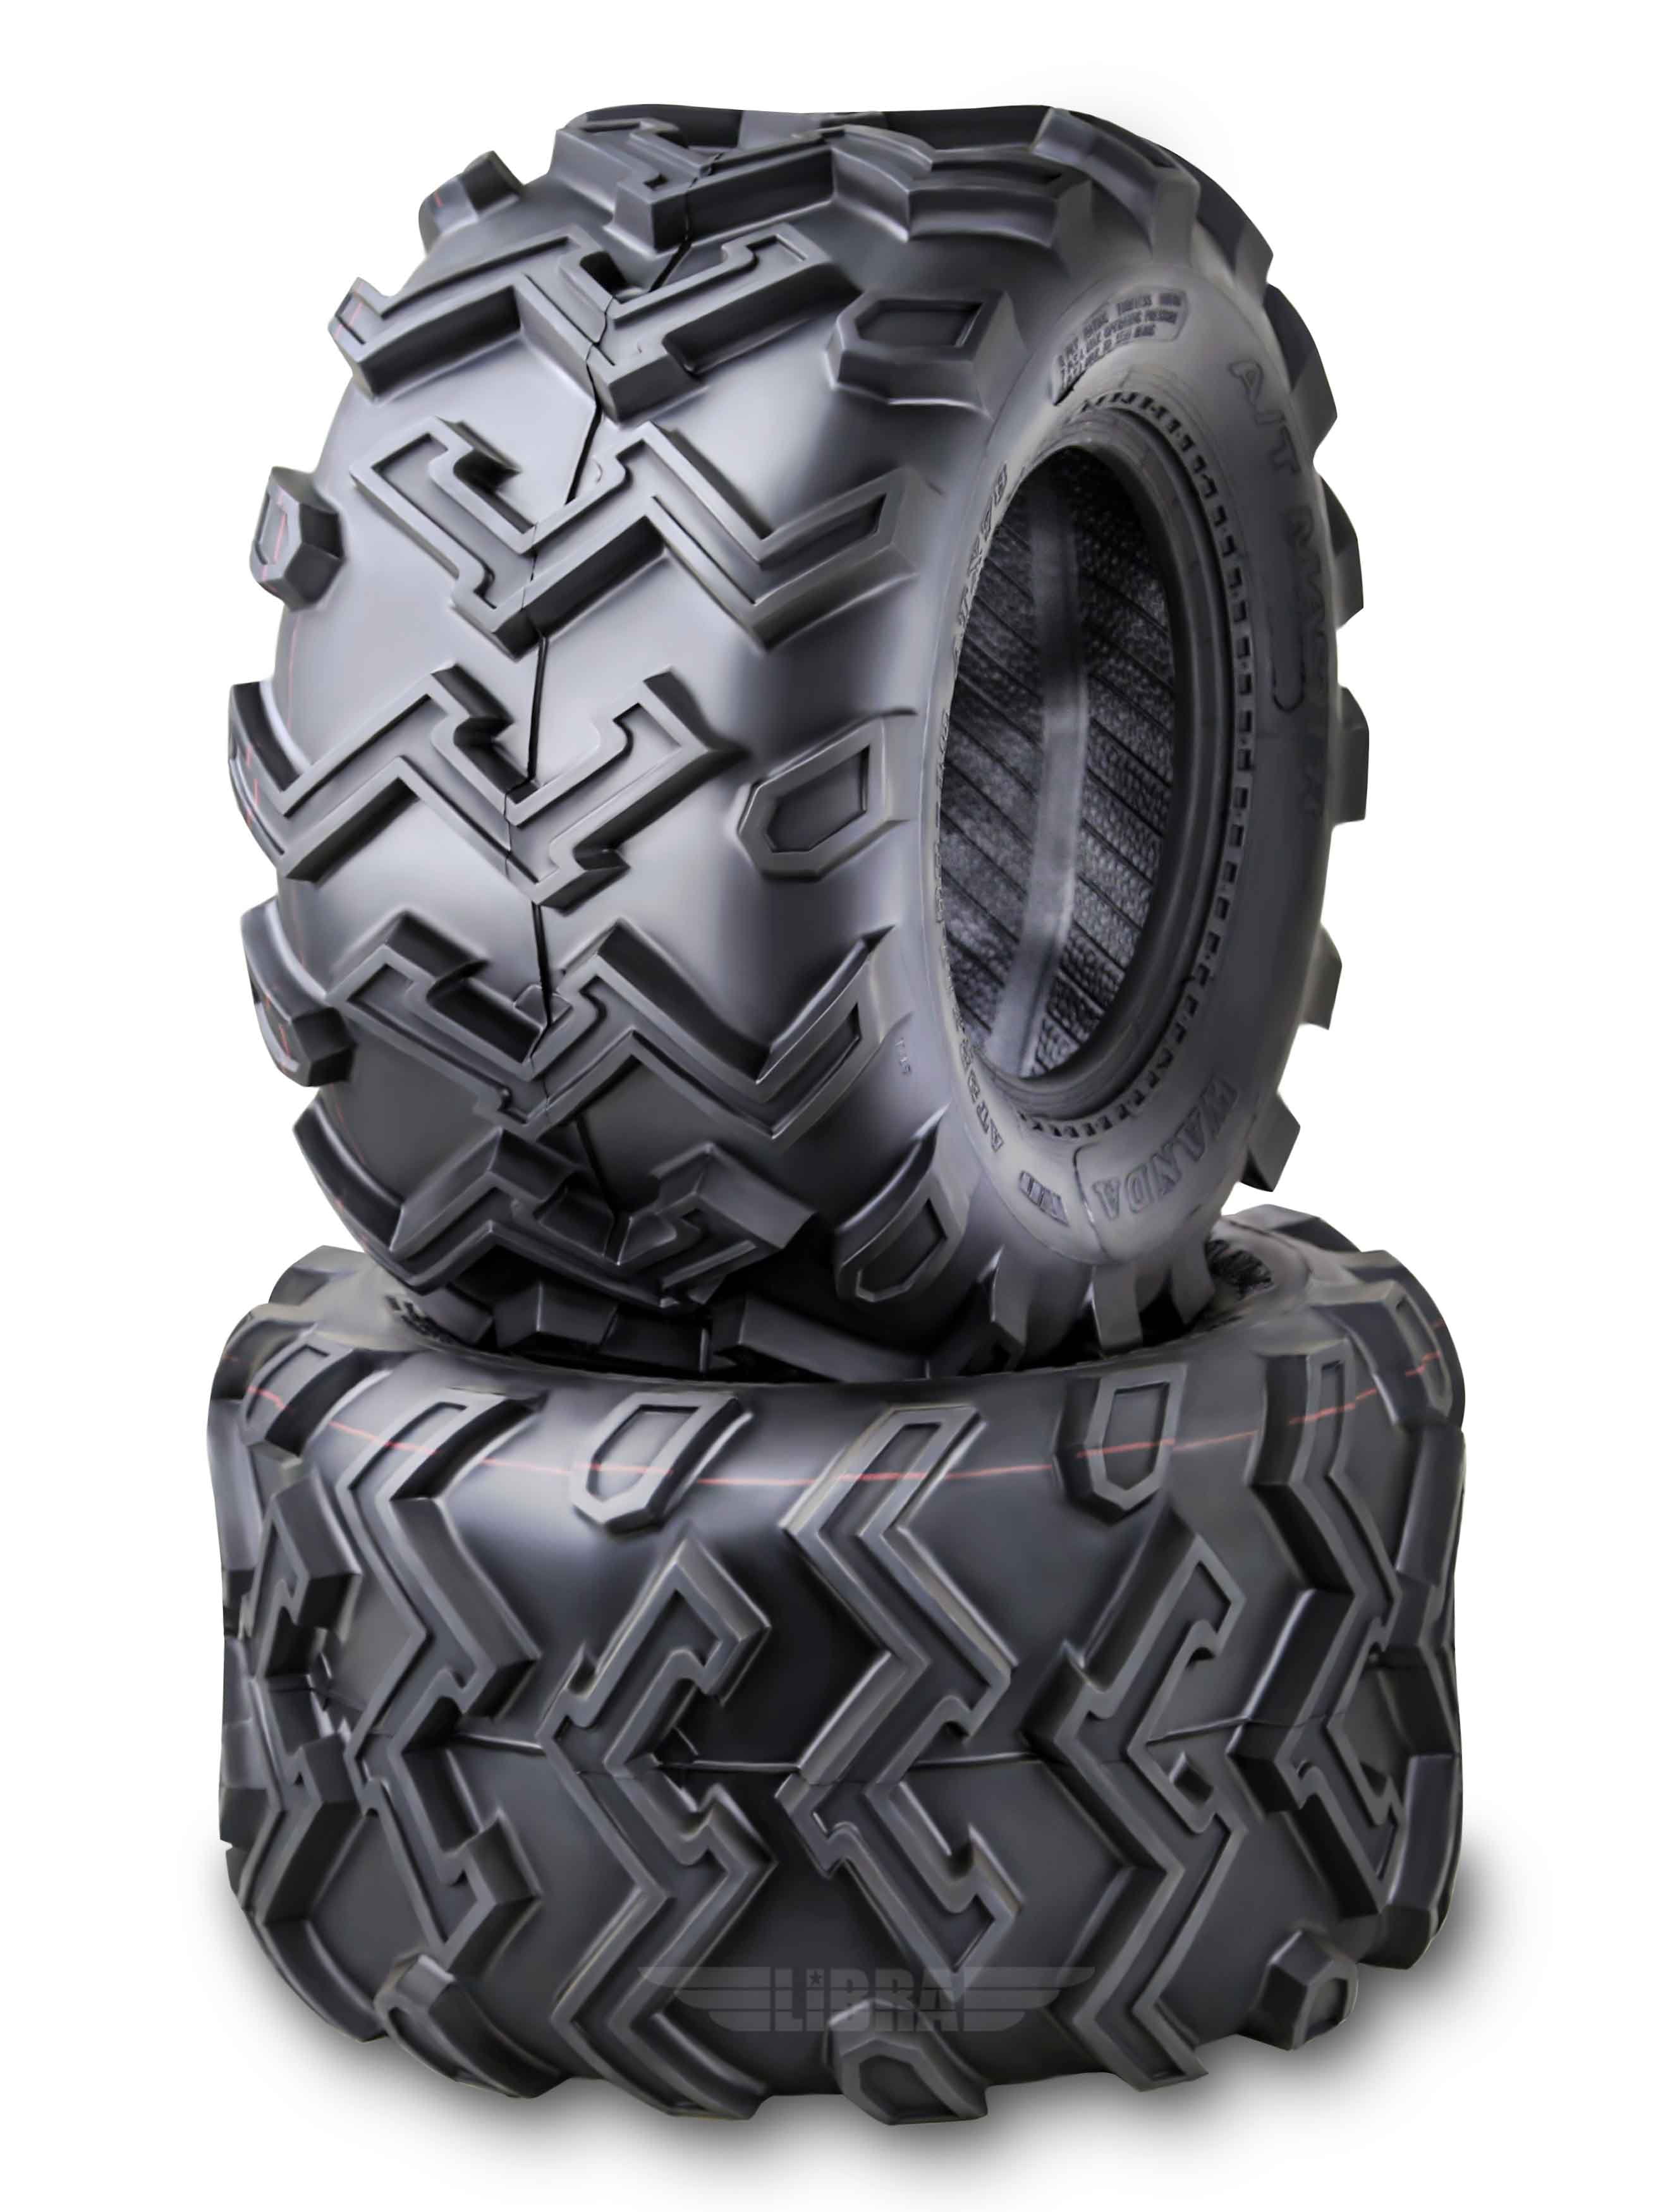 Set of 4 New ATV/UTV Tires 2 of 22x7-10 Front and 2 of 22x11-10 Rear /4PR 